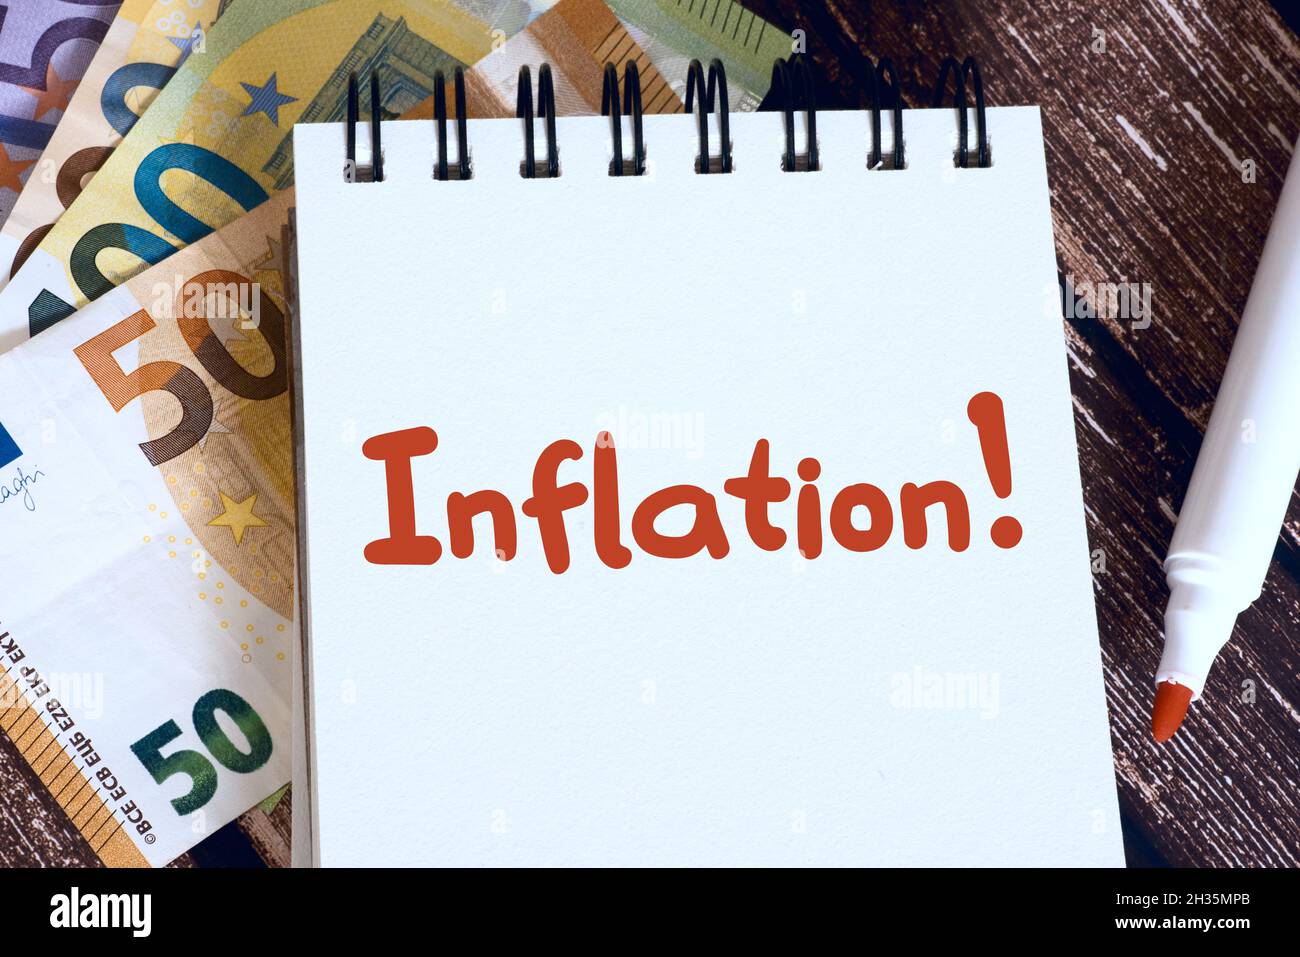 Euro banknotes and inflation in Europe Stock Photo